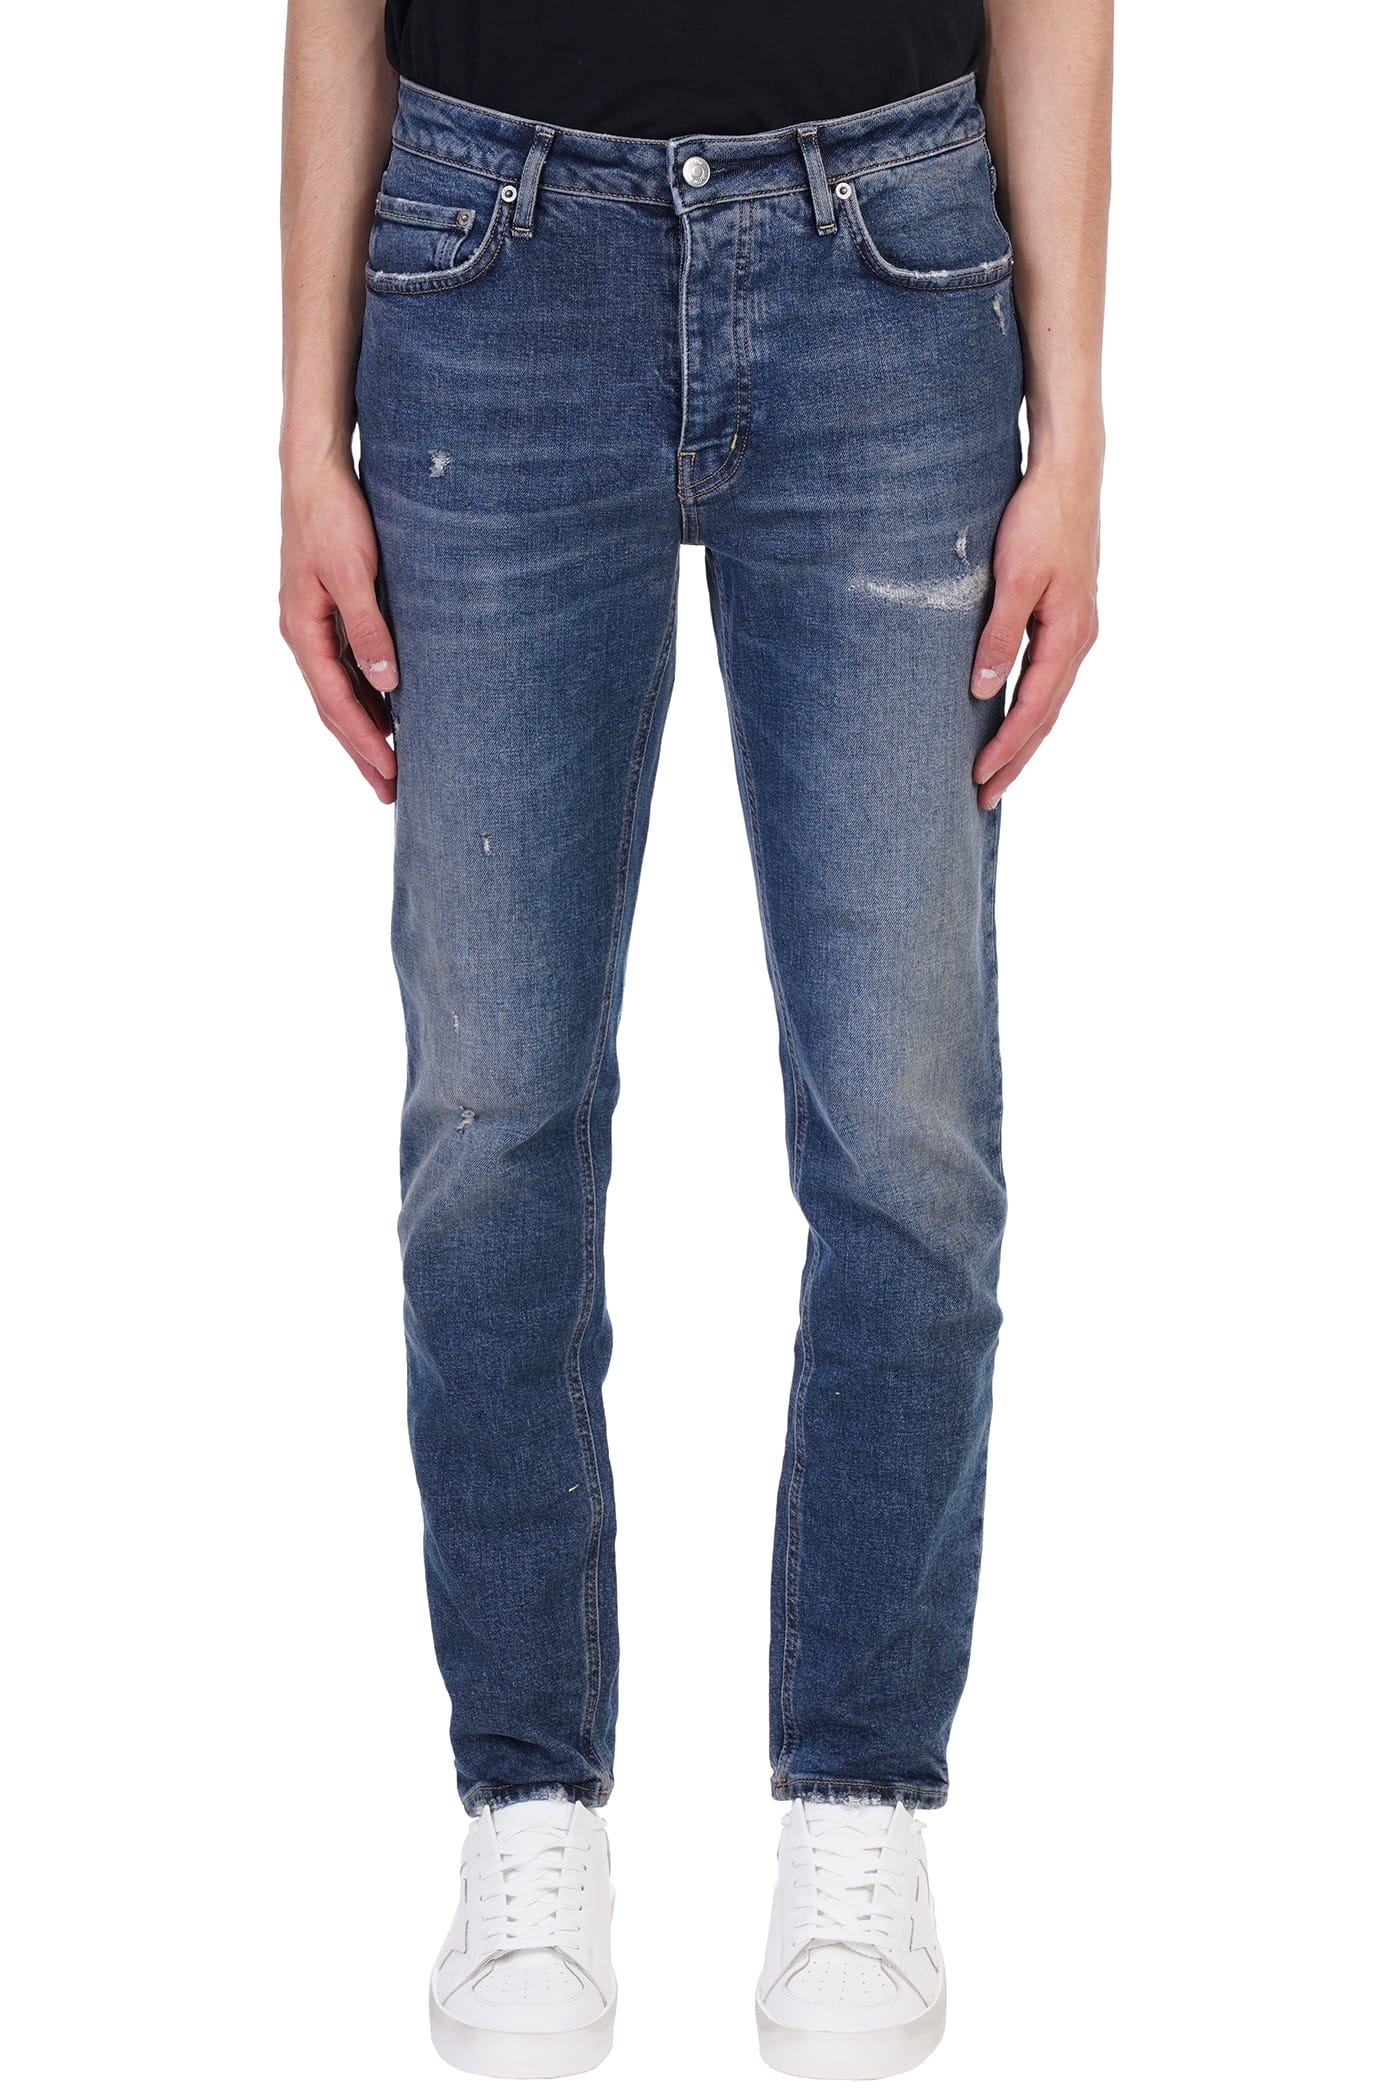 Haikure Cleveland Jeans In Blue Cotton